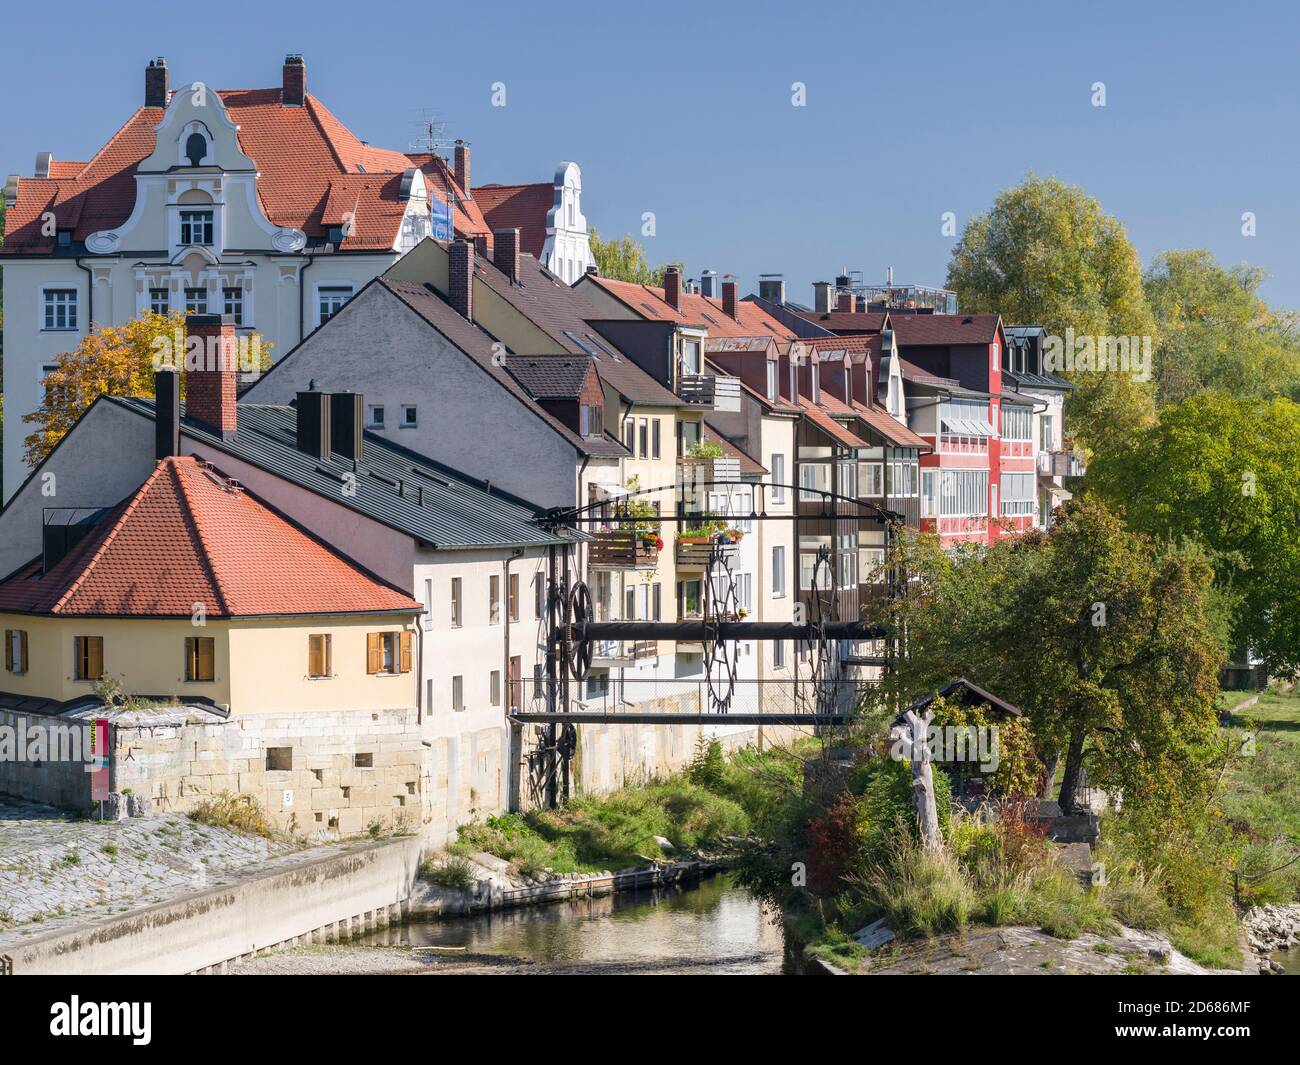 Regensburg in Bavaria, the Old Town is listed as UNESCO World Heritage. The Jahninsel, an island in the Danube.  Europe, Central Europe, Germany, Bava Stock Photo